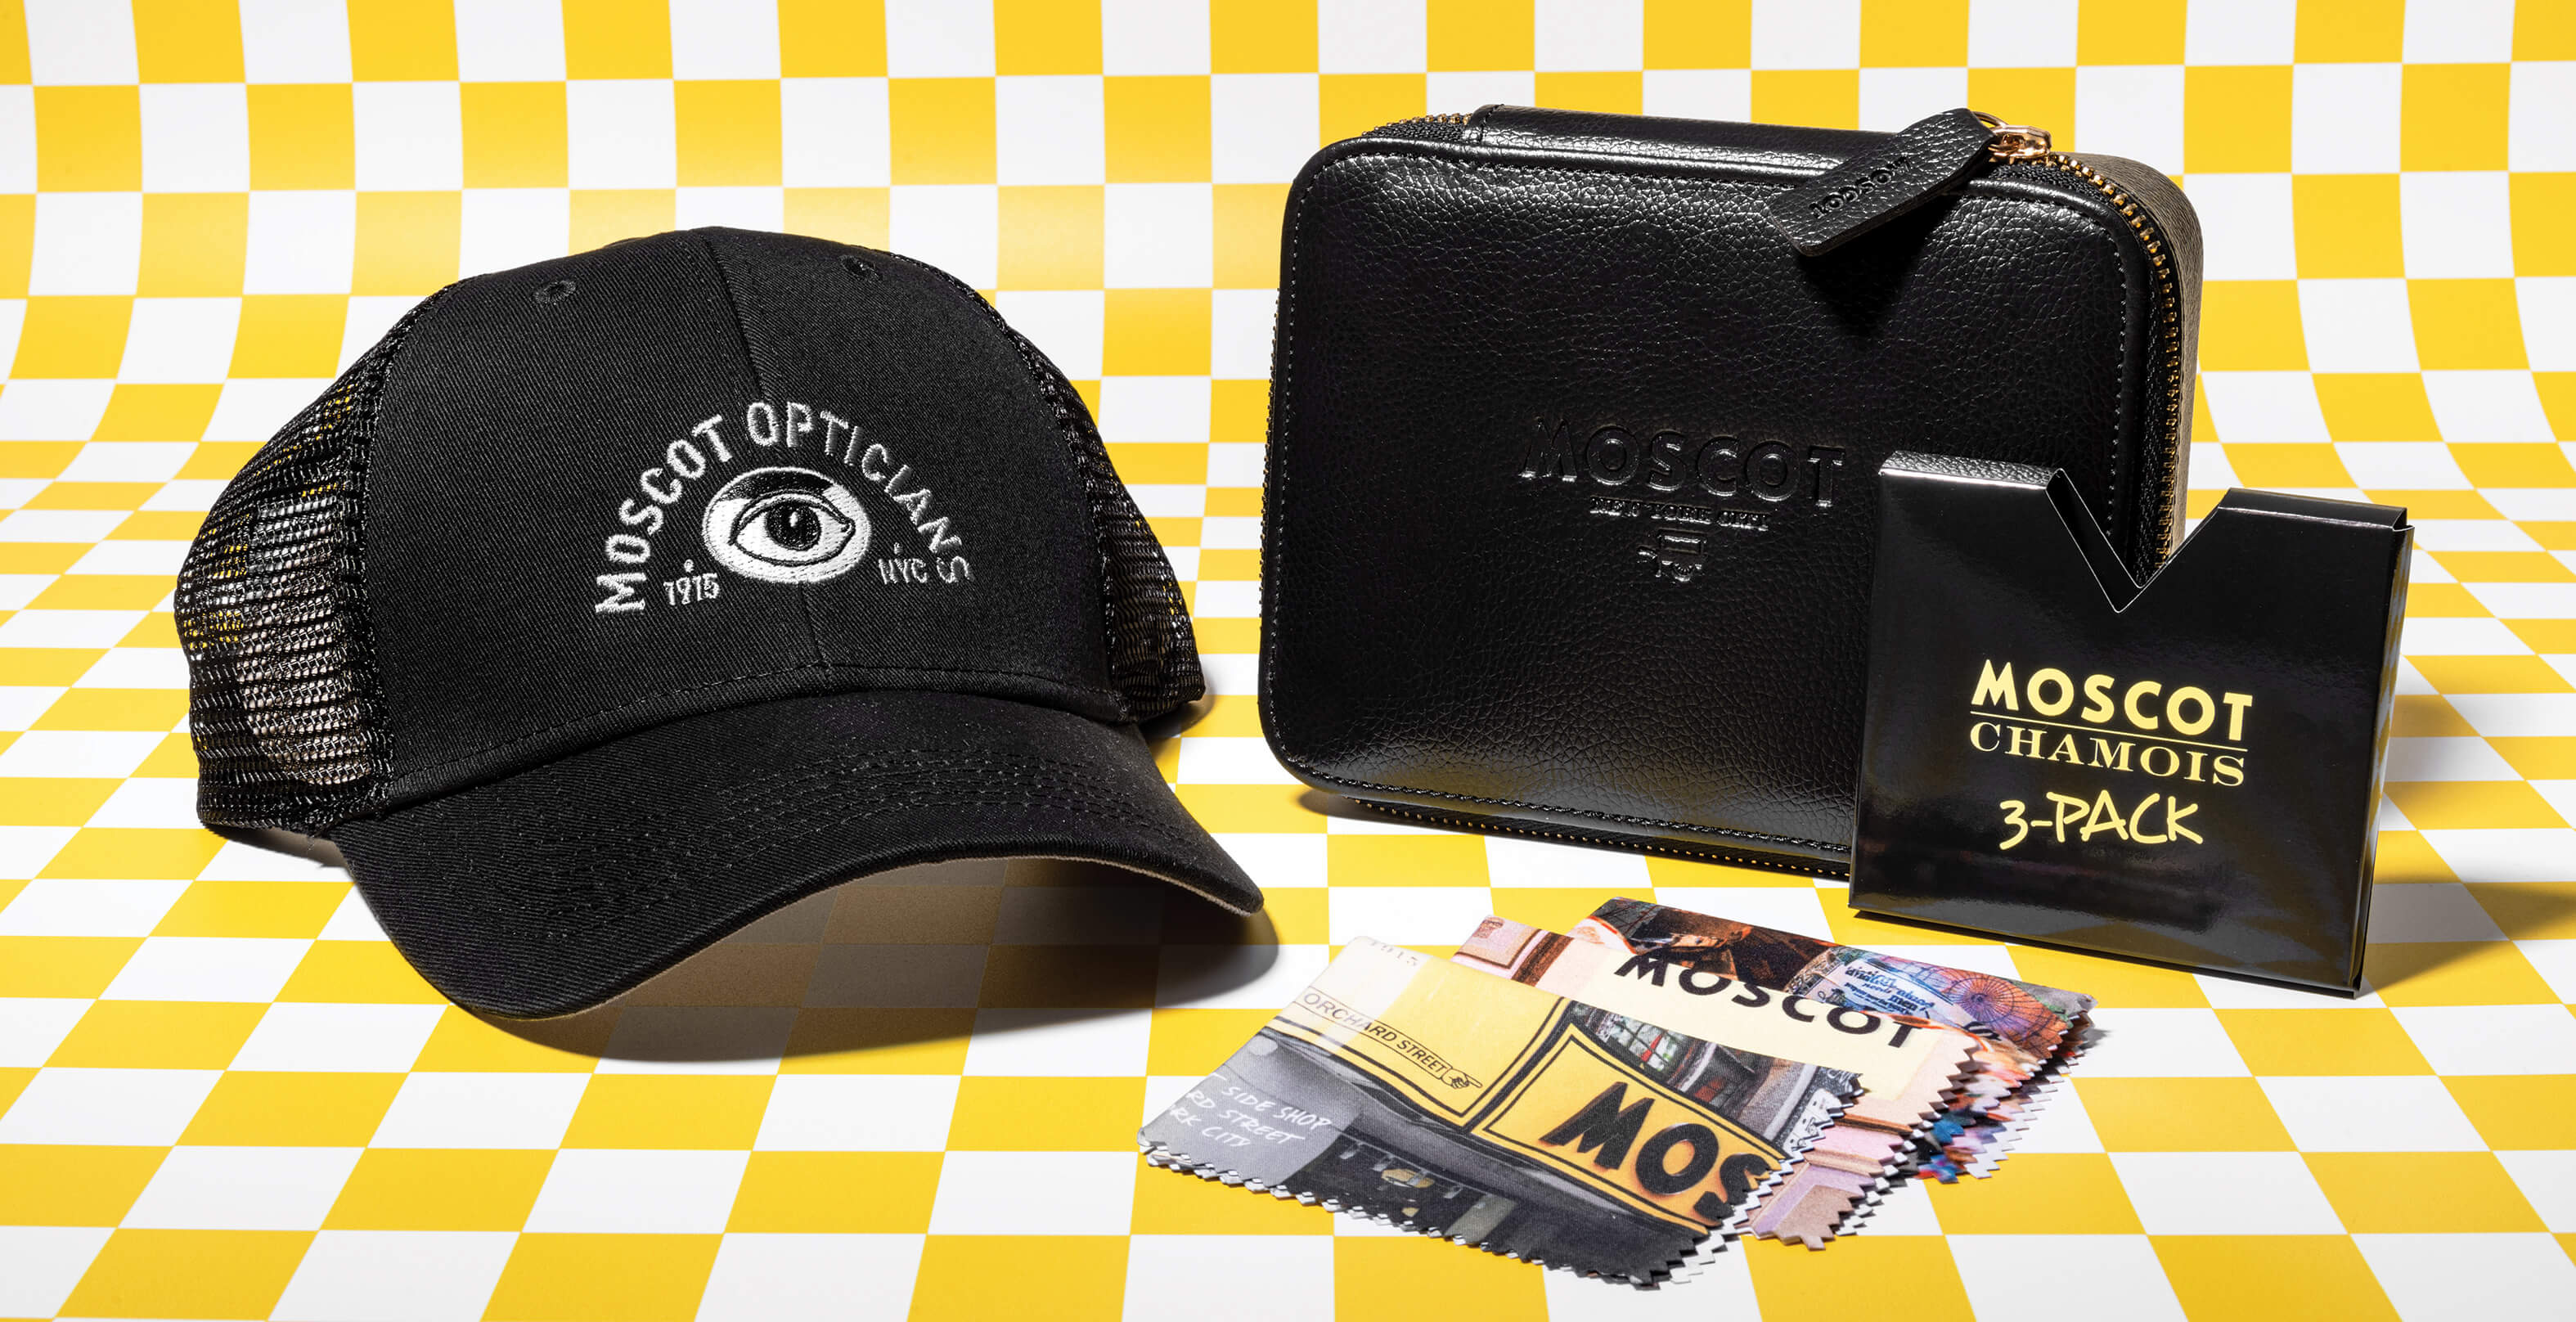 The ESSENTIALS KIT, includes The TRAVEL CASE MINI, The CHAMOIS 3 PACK, and The SNAPBACK